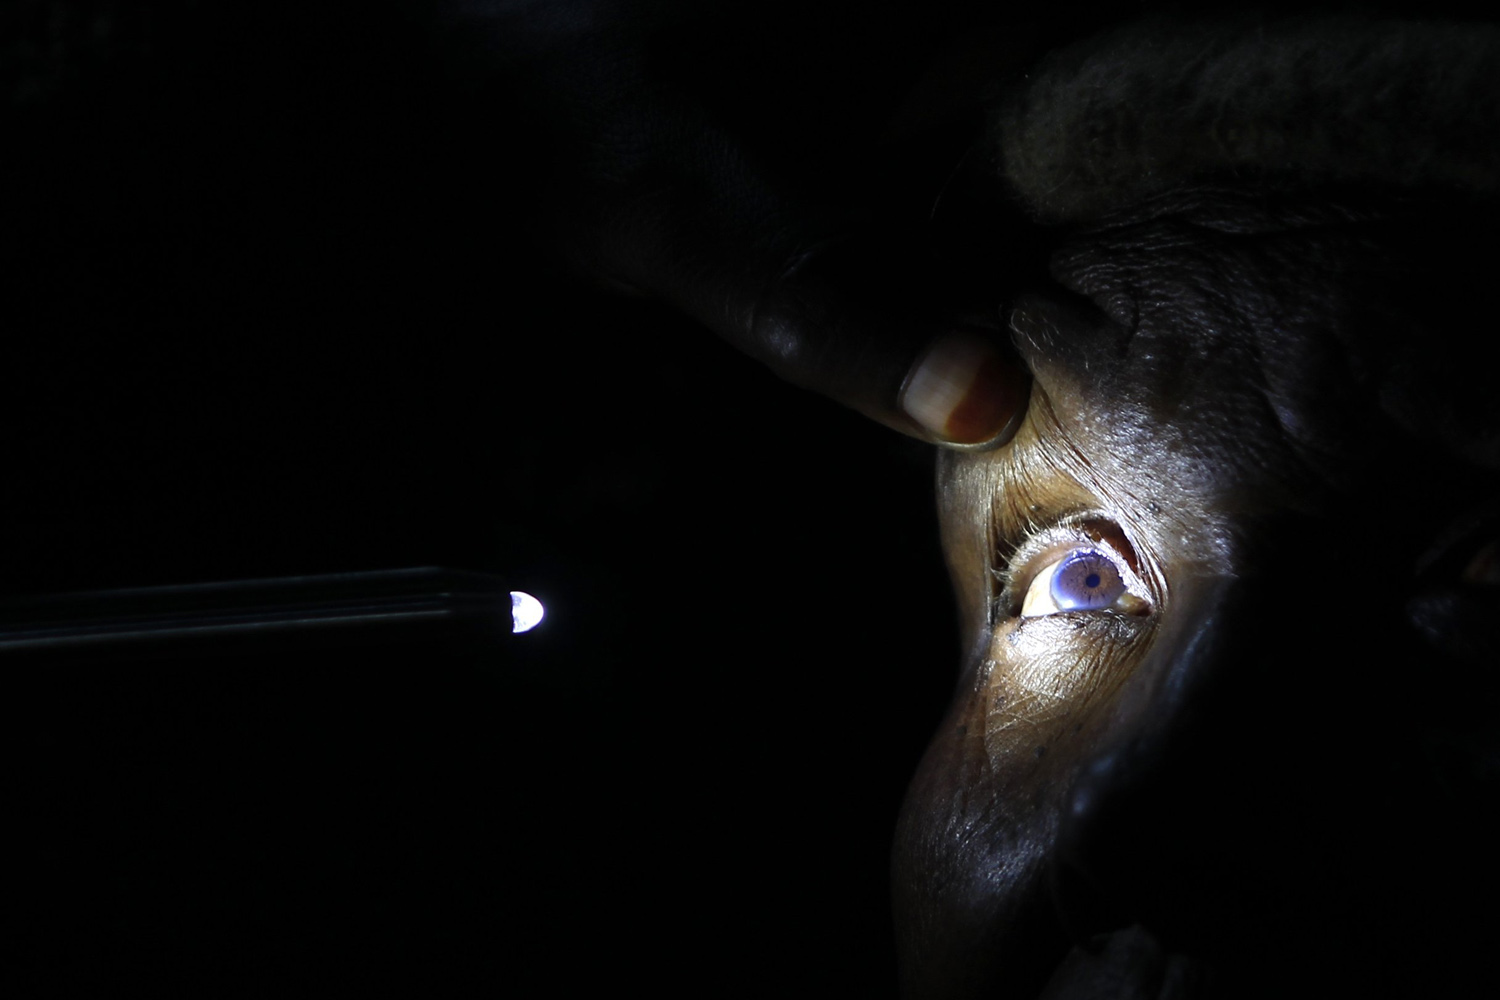 Oct. 29, 2013. An eye attendant examines the eye of a patient at a temporary clinic by International Center for Eye Health at Olenguruone, Nairobi.